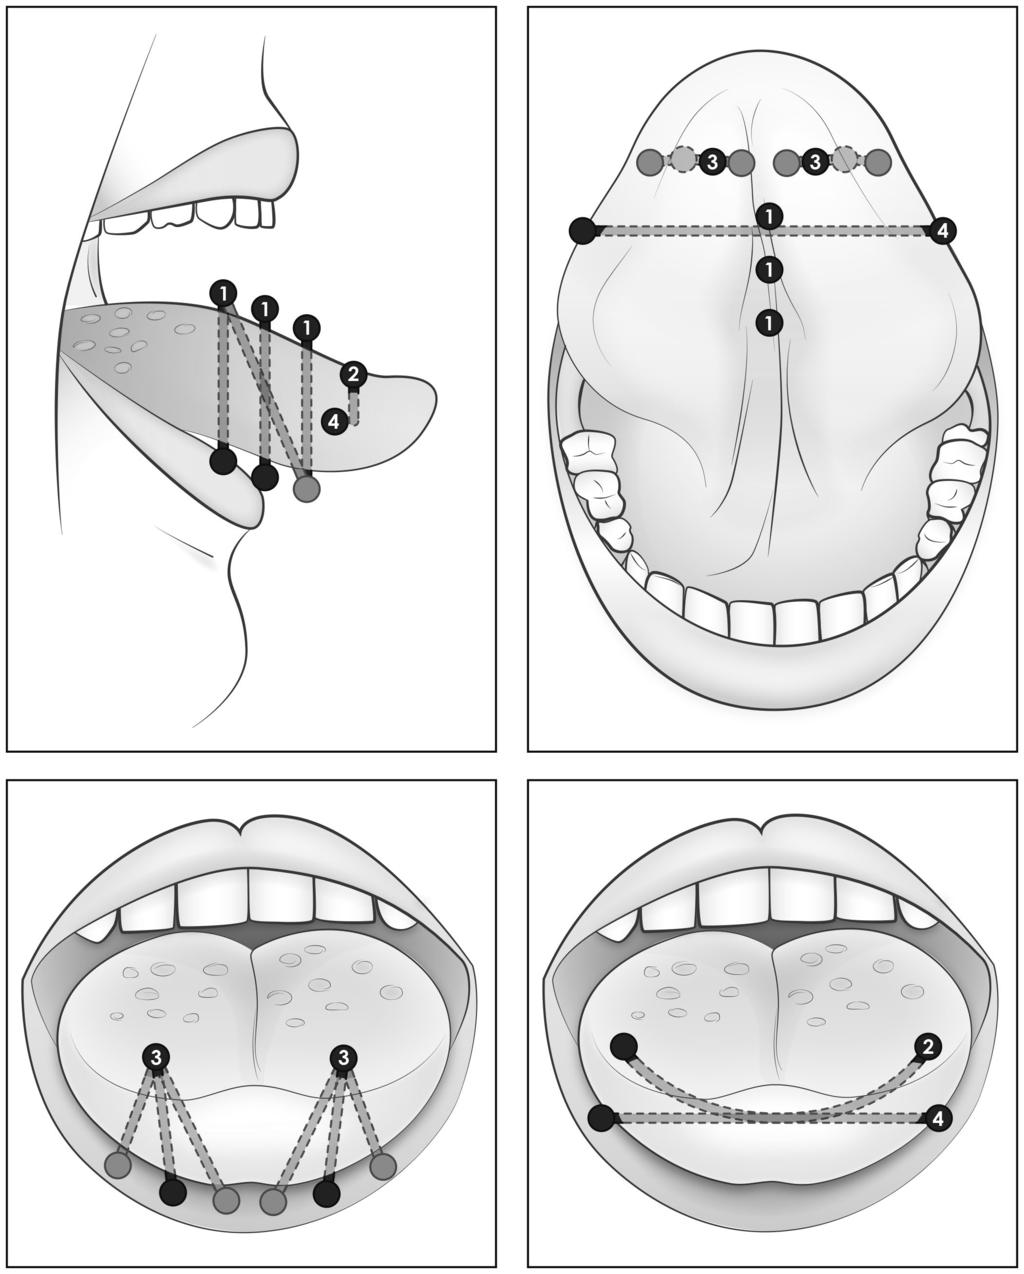 Section 3: Tongue and oral piercings 1.